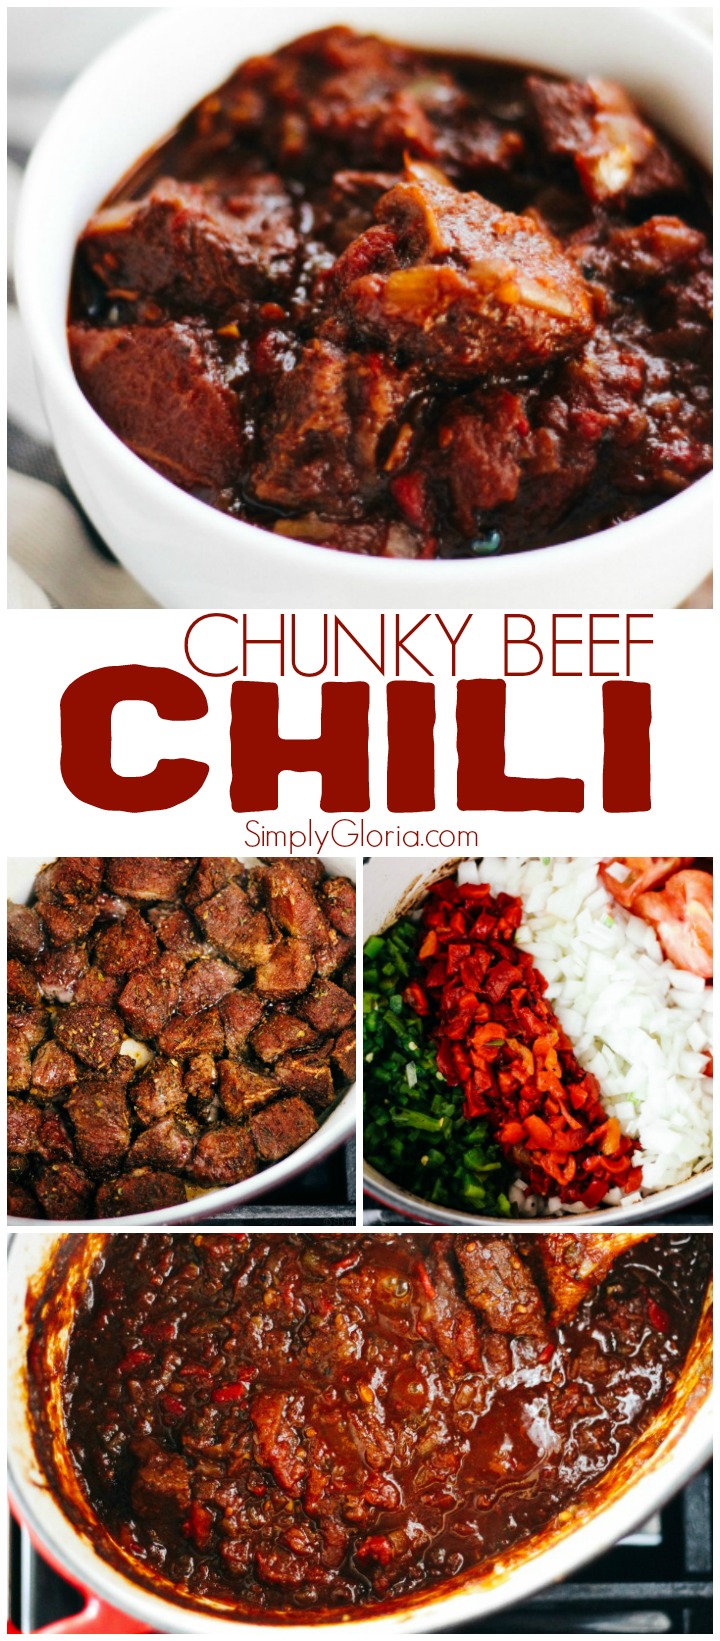 Chunky Beef Chili with fresh vegetables and simmered to perfection! #chili